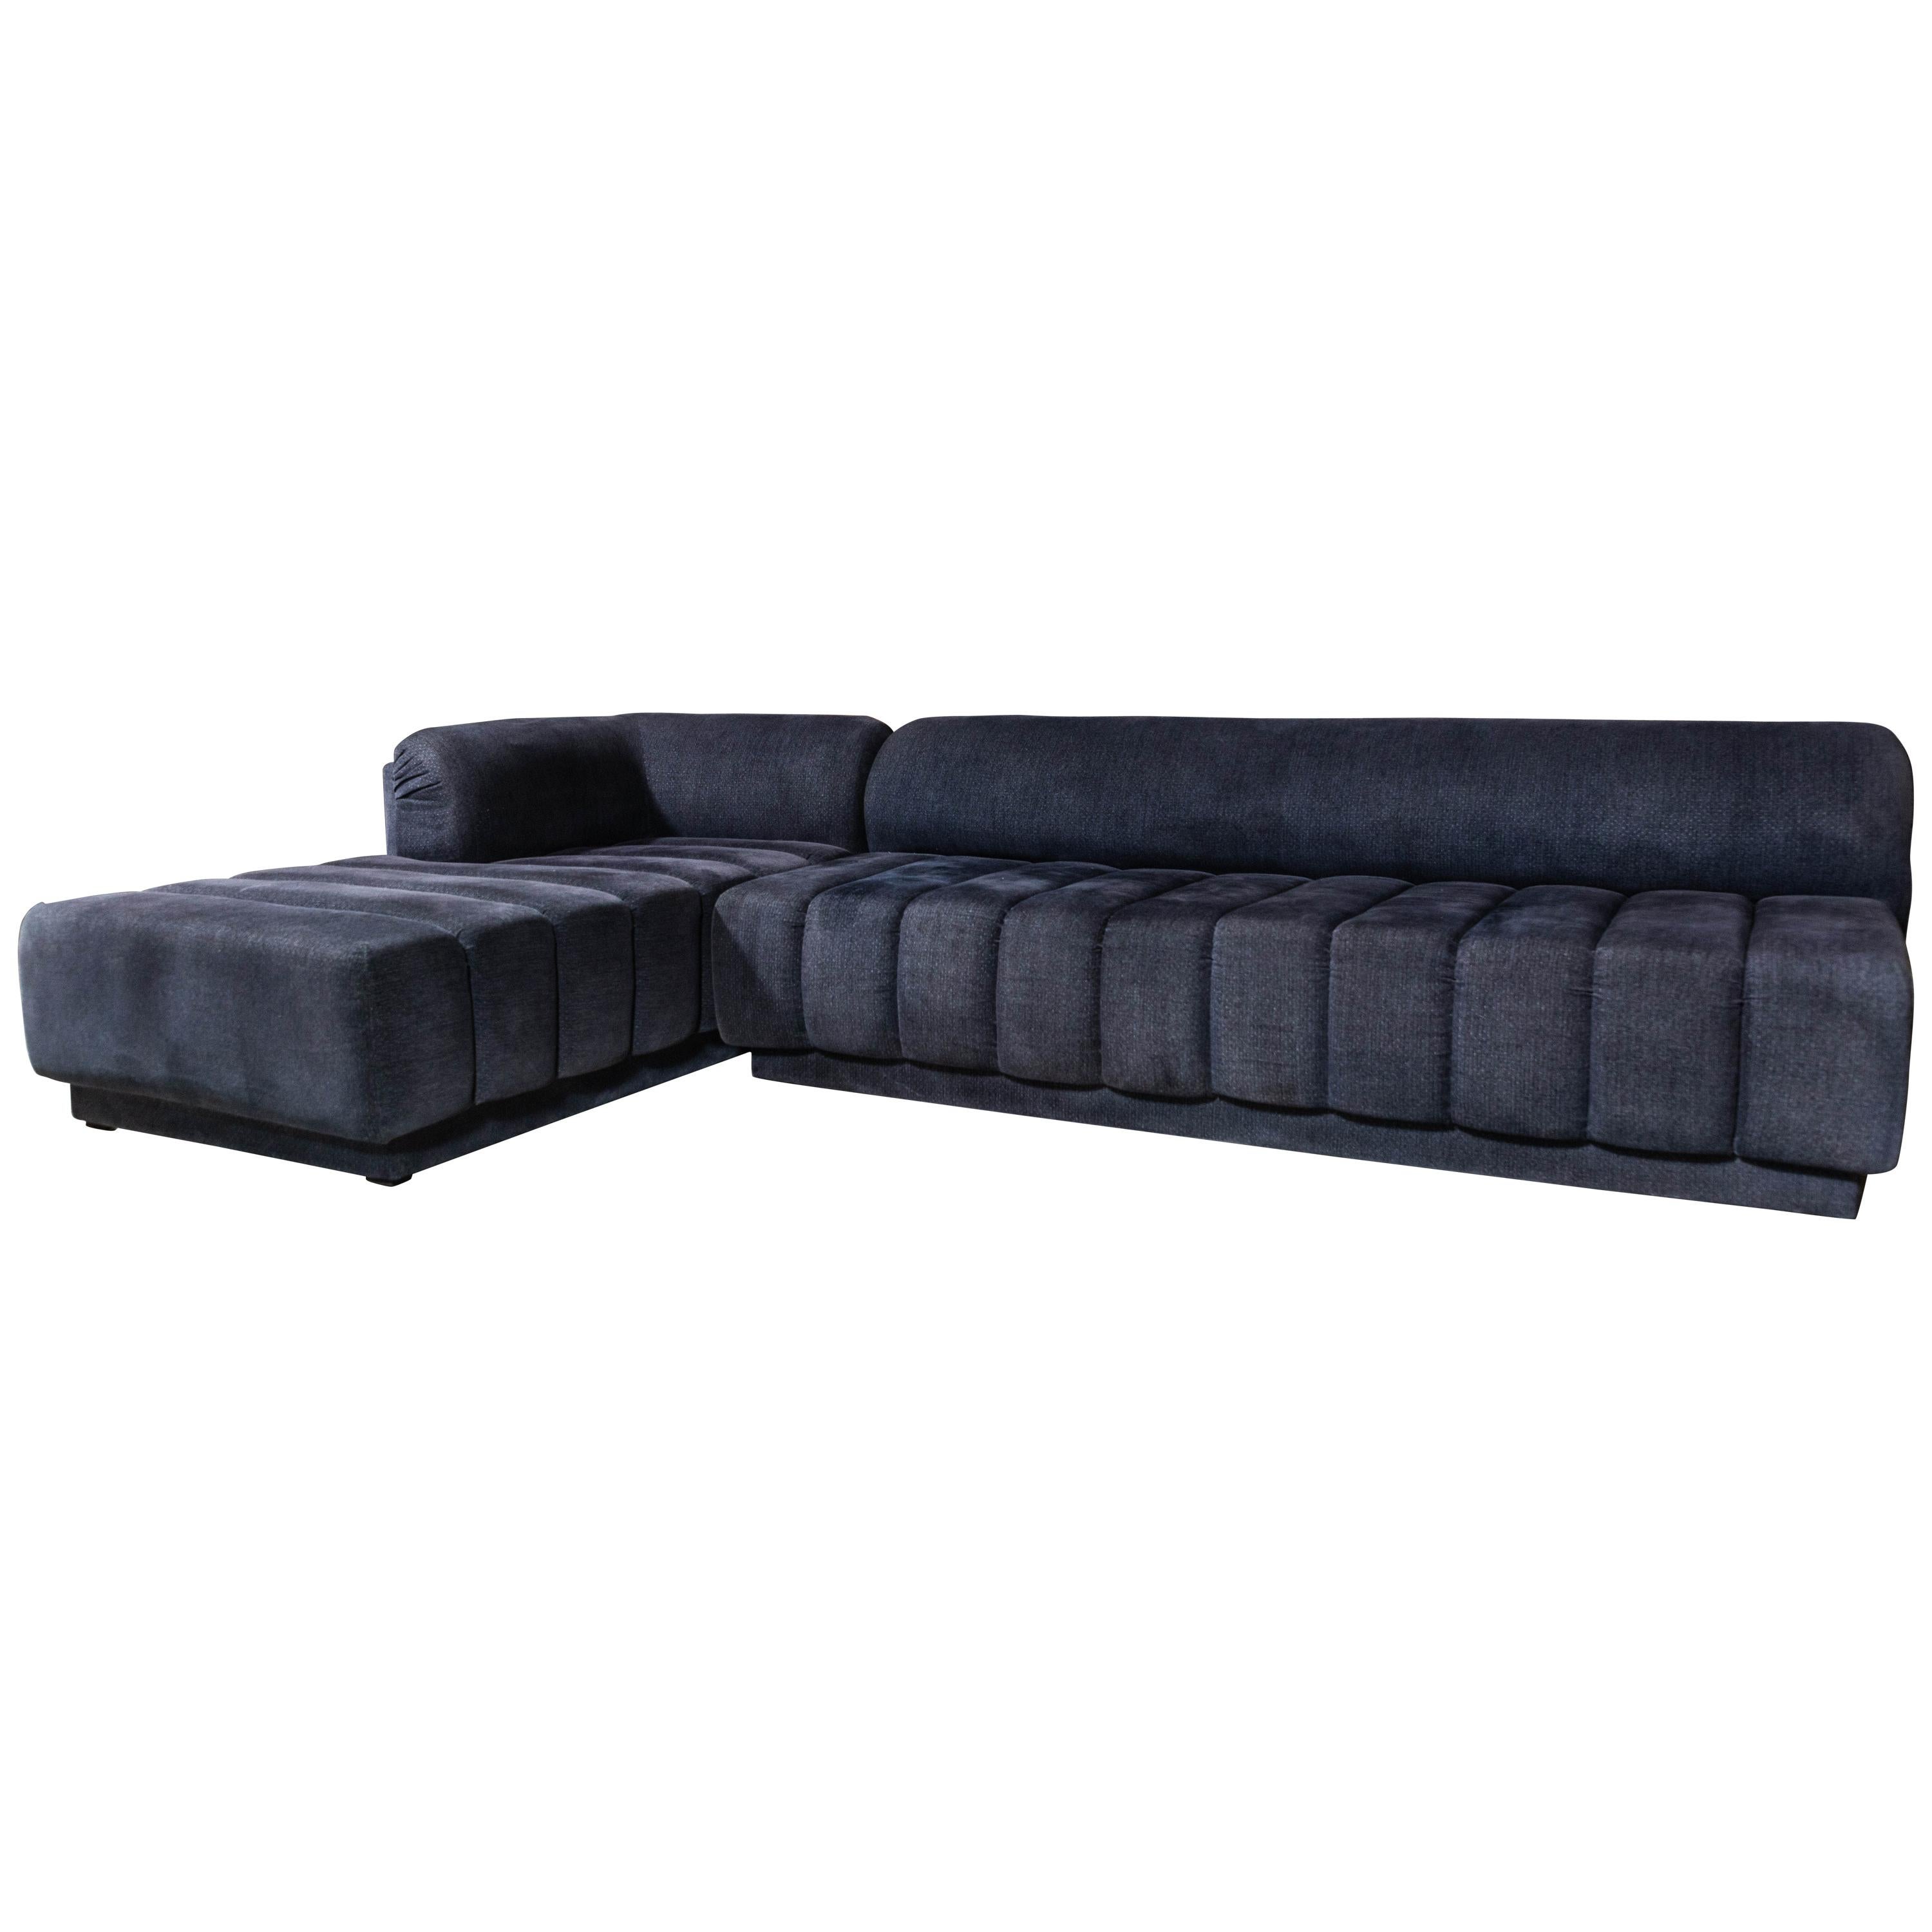 Rare and Amazing Designer Sectional Sofa by Directional, Dated 1987 For Sale